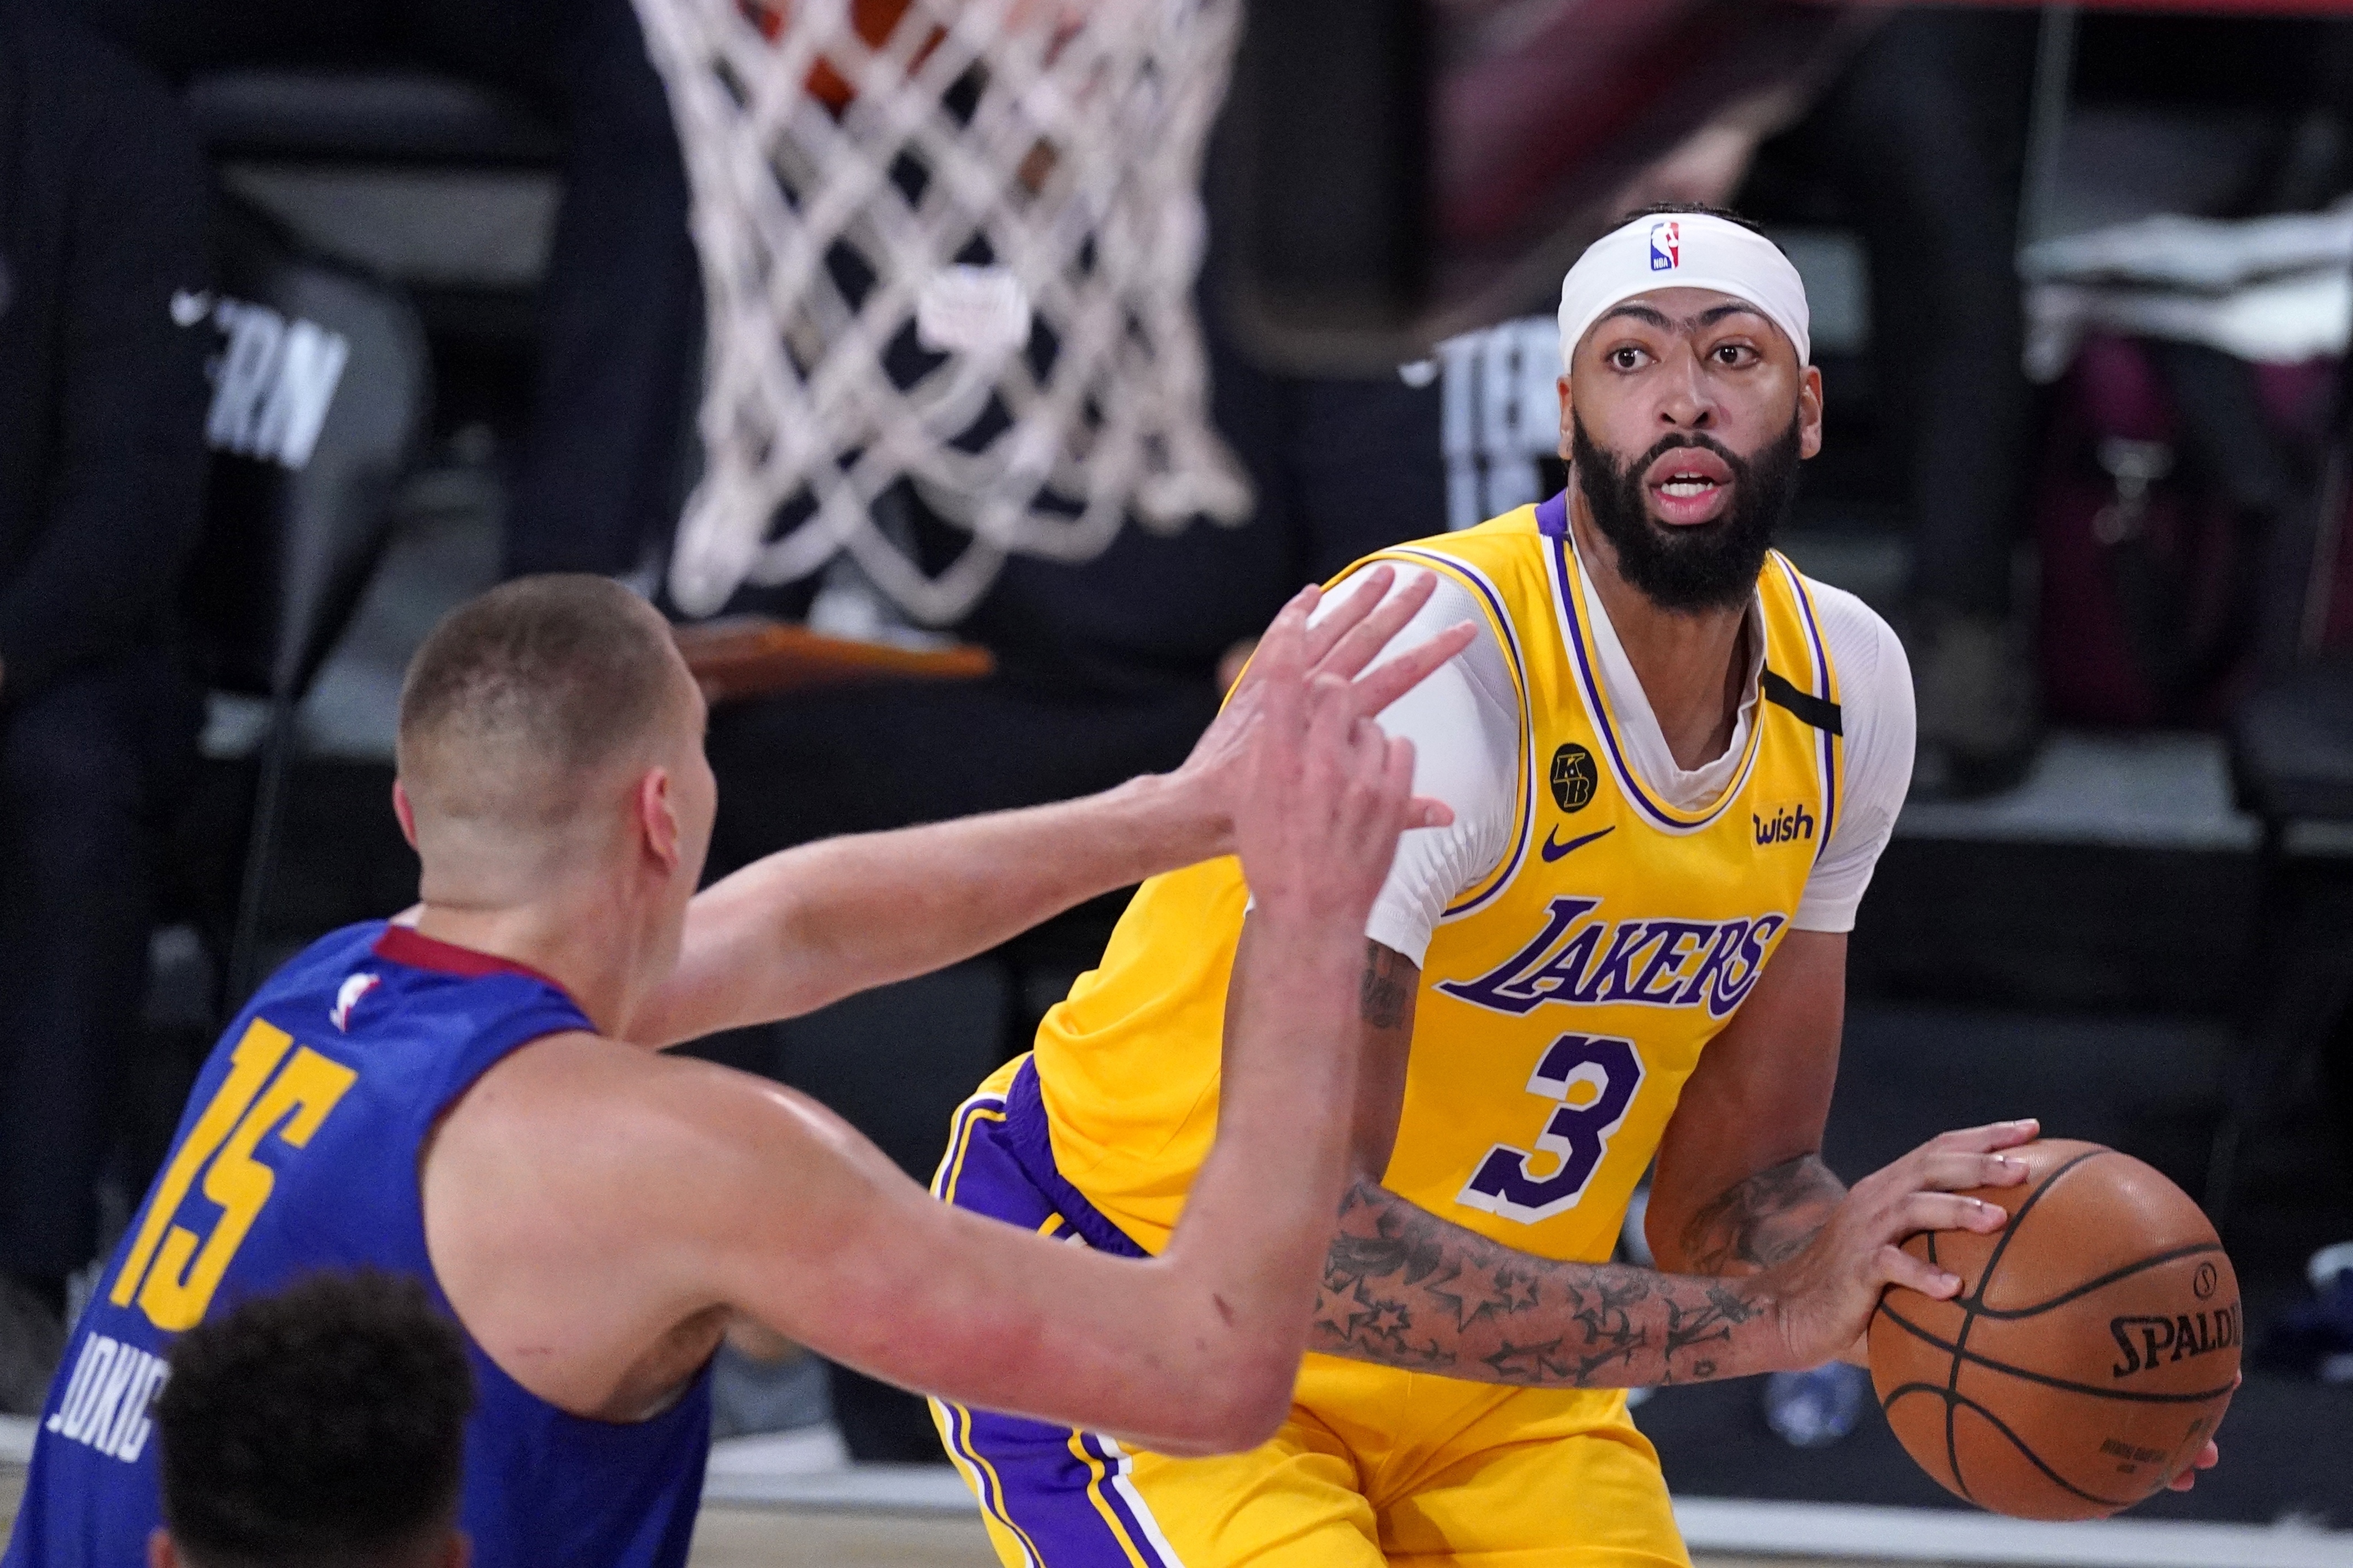 Golden State's offense heats up as Lakers drop Game 2